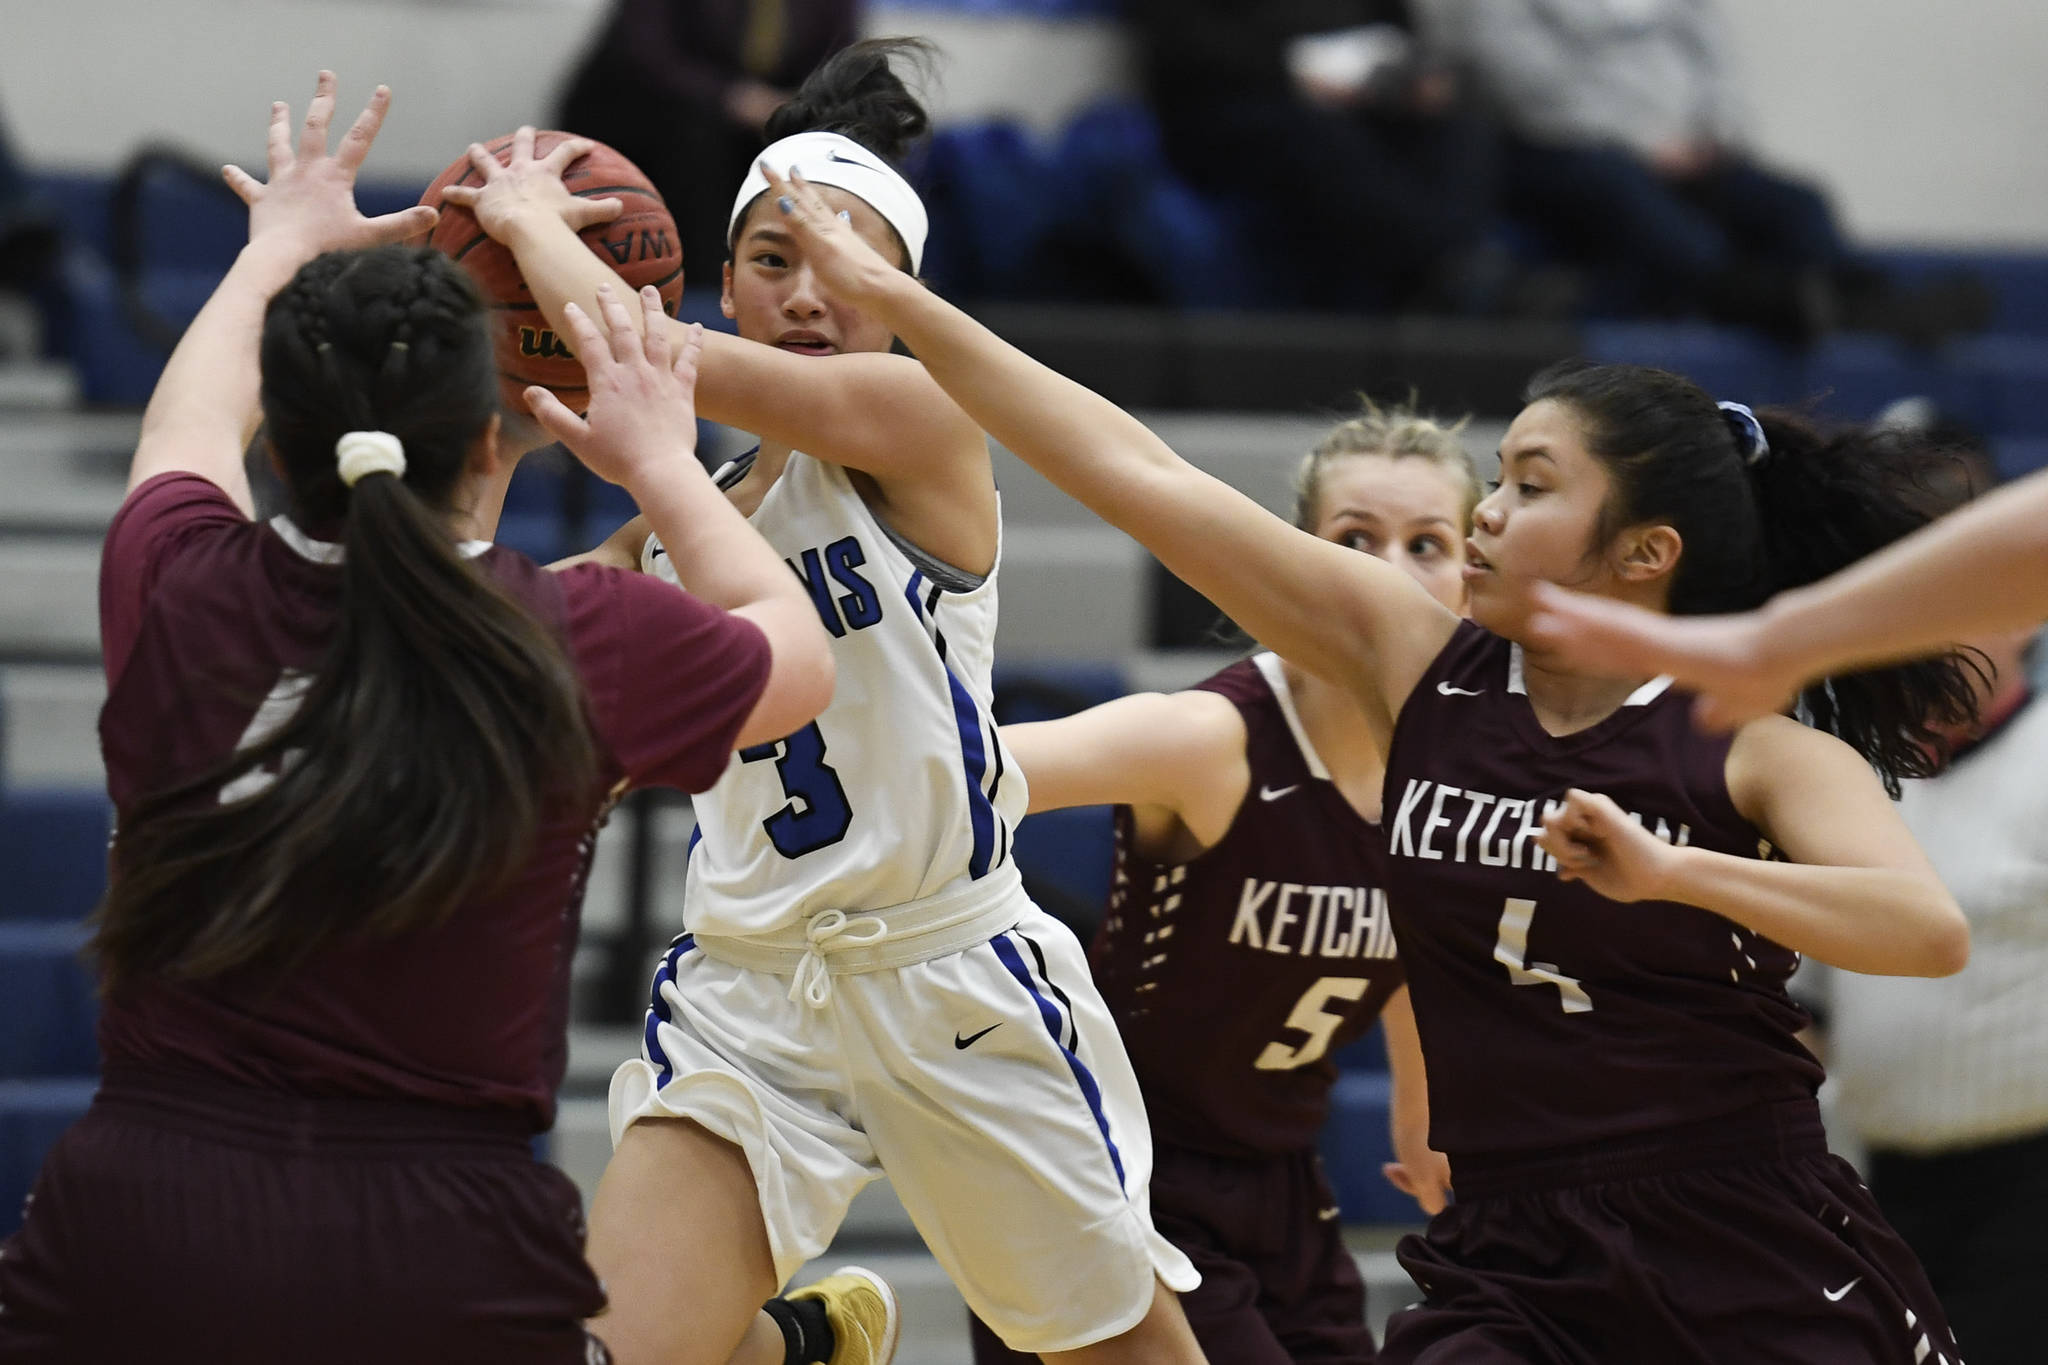 Thunder Mountain’s Mary Neal Garcia looks to pass against Ketchikan’s Nadire Zhuta, left, Emmie Smith, center, and Lianne Guevarra at TMHS on Friday, Jan. 25, 2019. Ketchikan won 42-36. (Michael Penn | Juneau Empire)